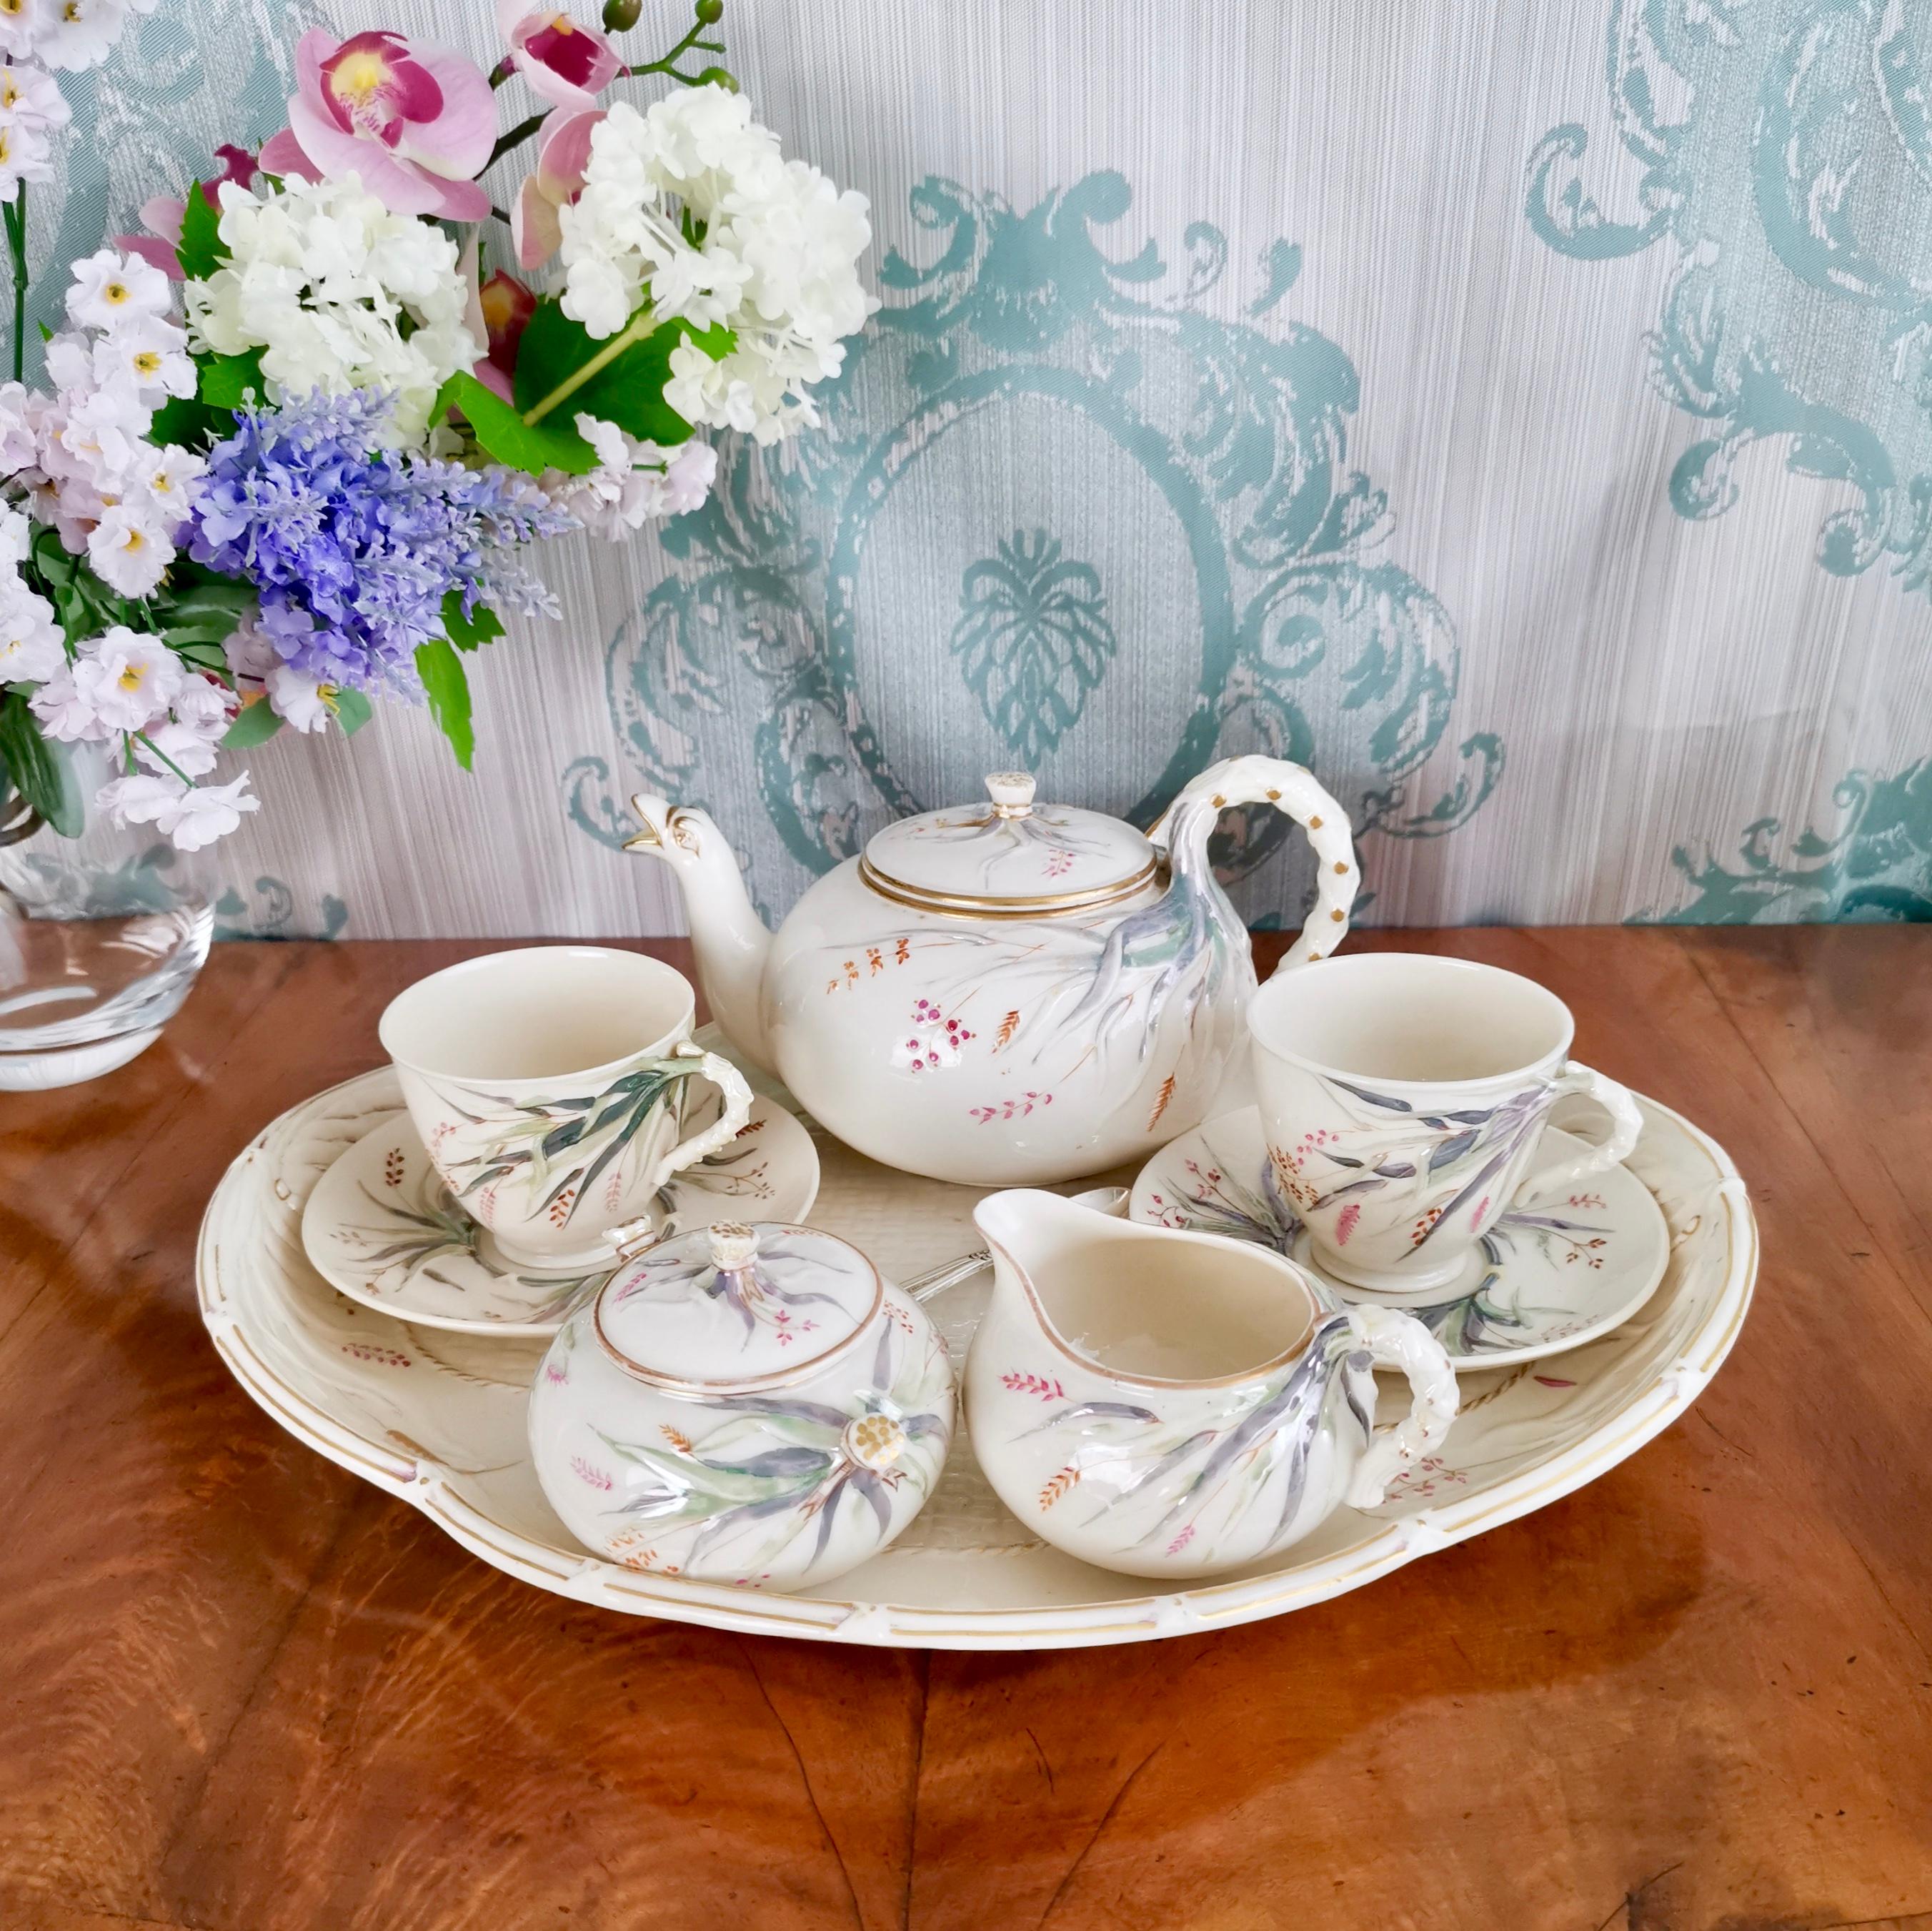 This is a beautiful Belleek porcelain cabaret tea set in the Grass design made by Belleek between 1863 and 1891, which was the Victorian era. It consists of a teapot, two teacups and saucers, a milk jug and a lidded sugar bowl, all placed on a large